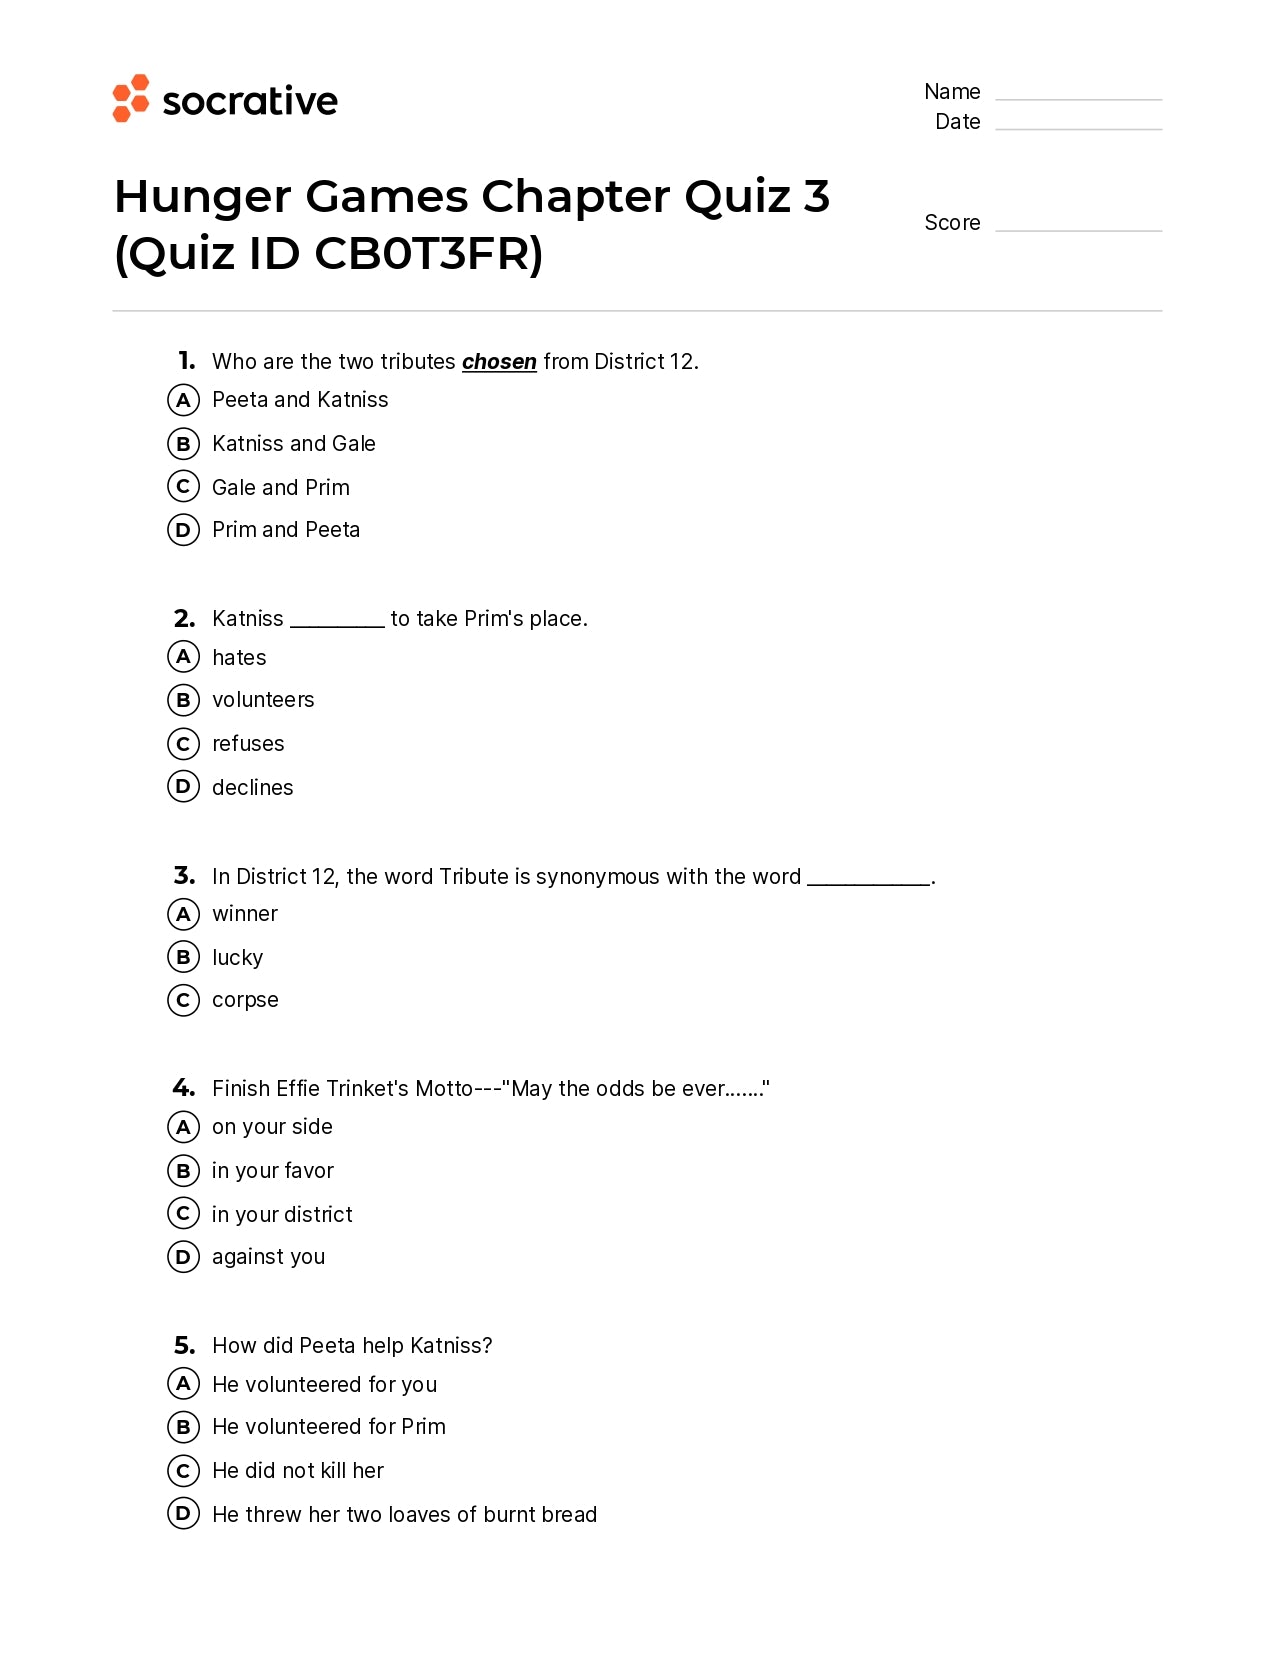 Hunger Games Chapter Quiz 3